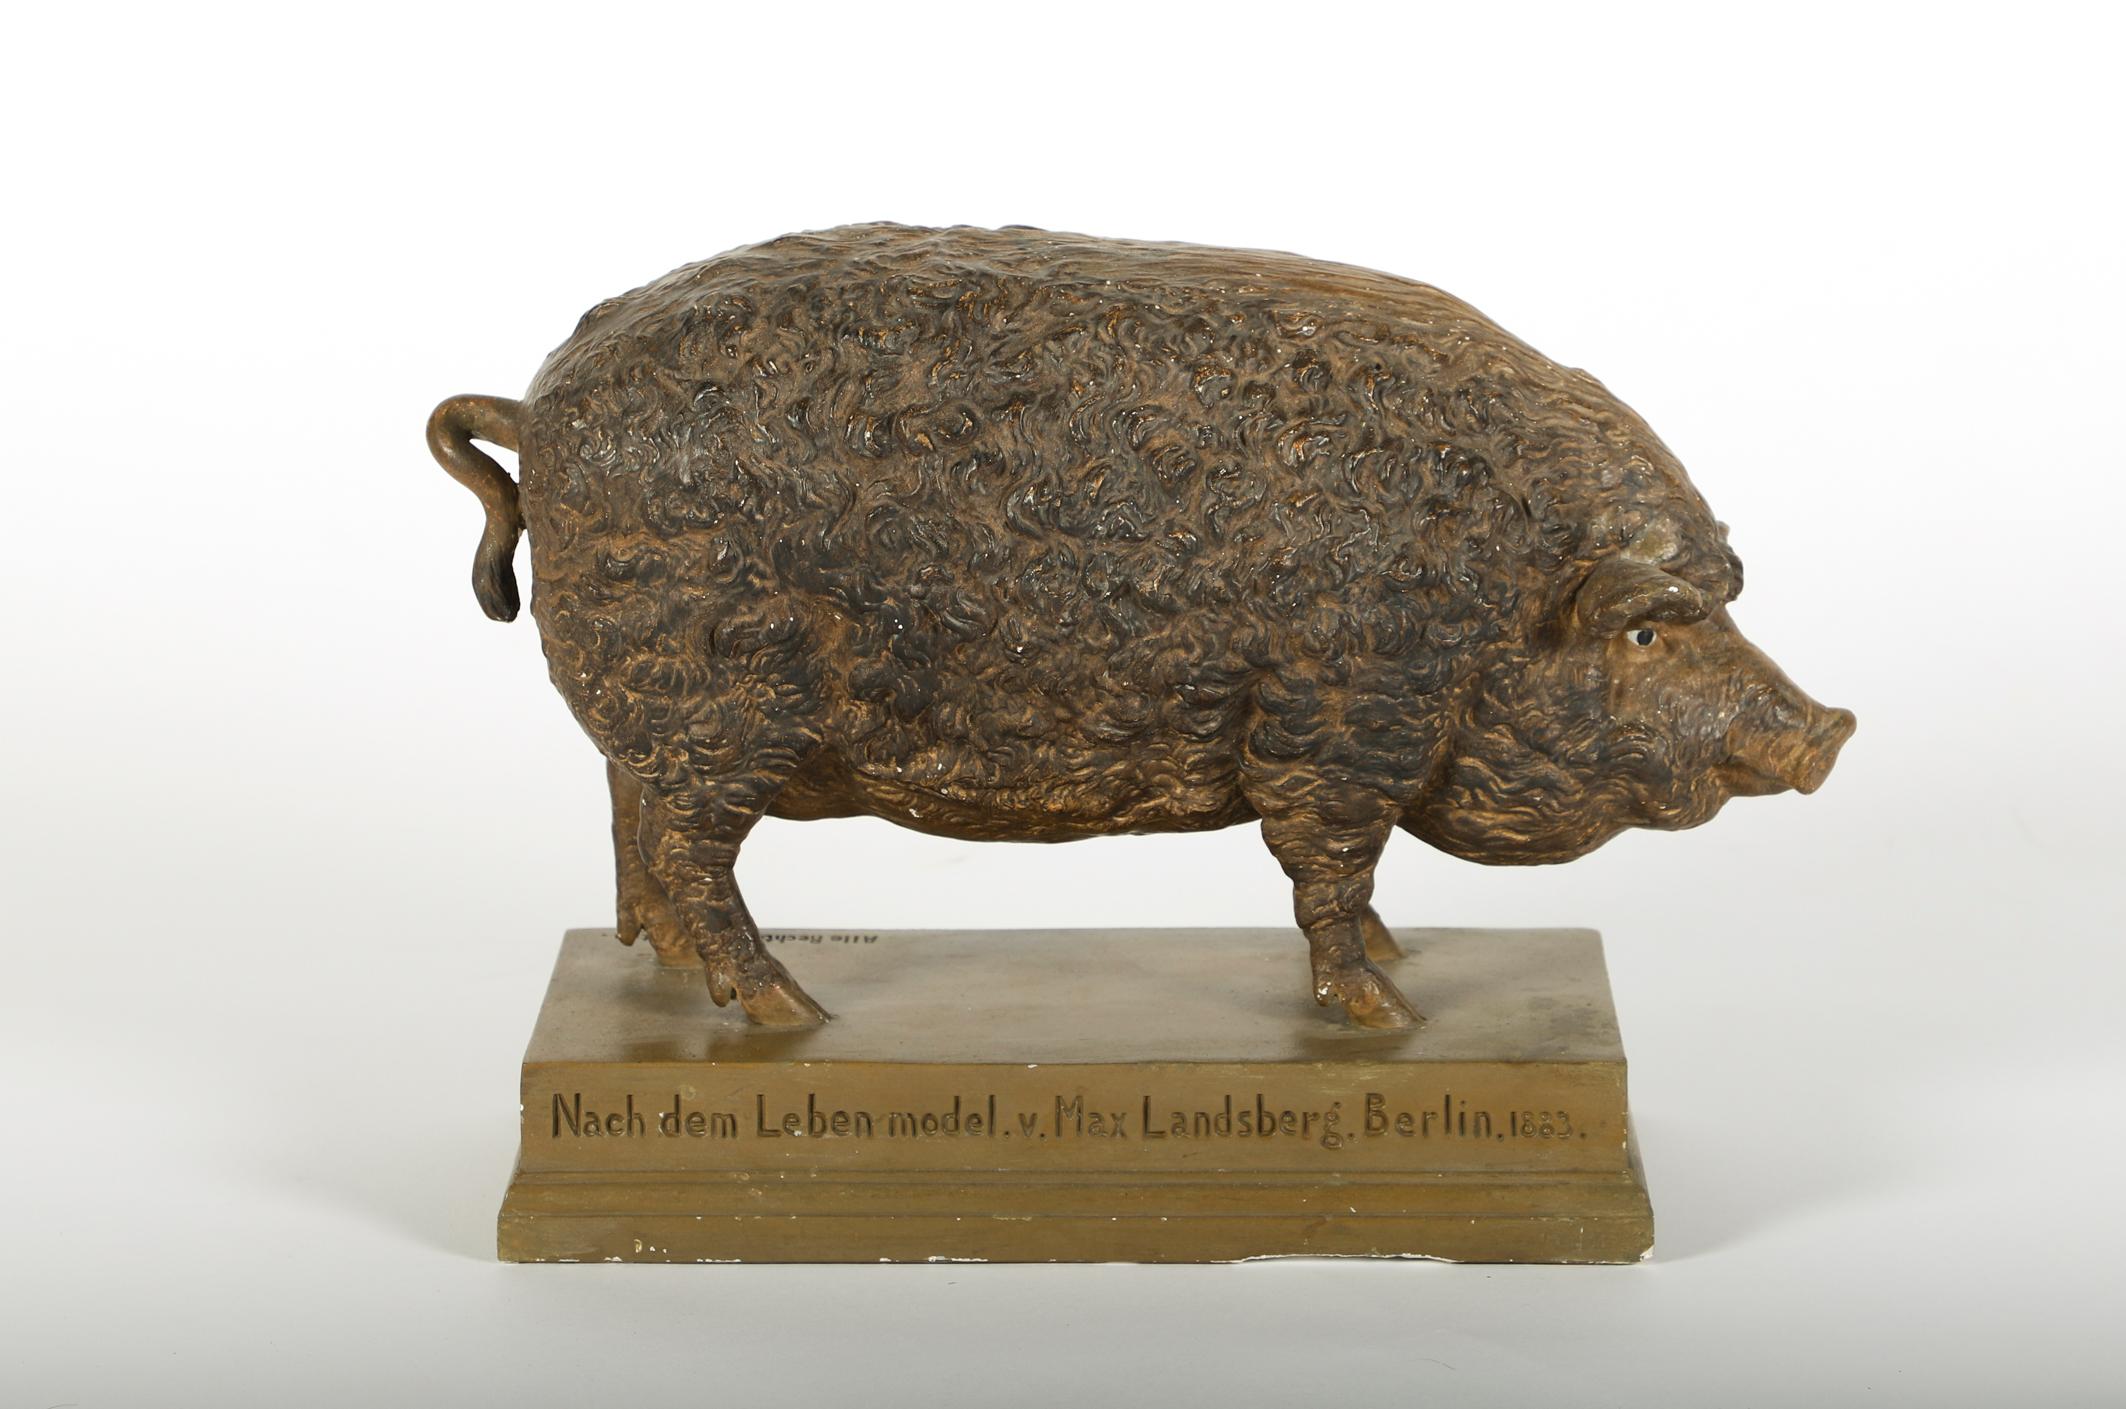 Painted Very Fine Plaster Model of a Mangalicza Pig by Max Landsberg, Berlin, 1883 For Sale